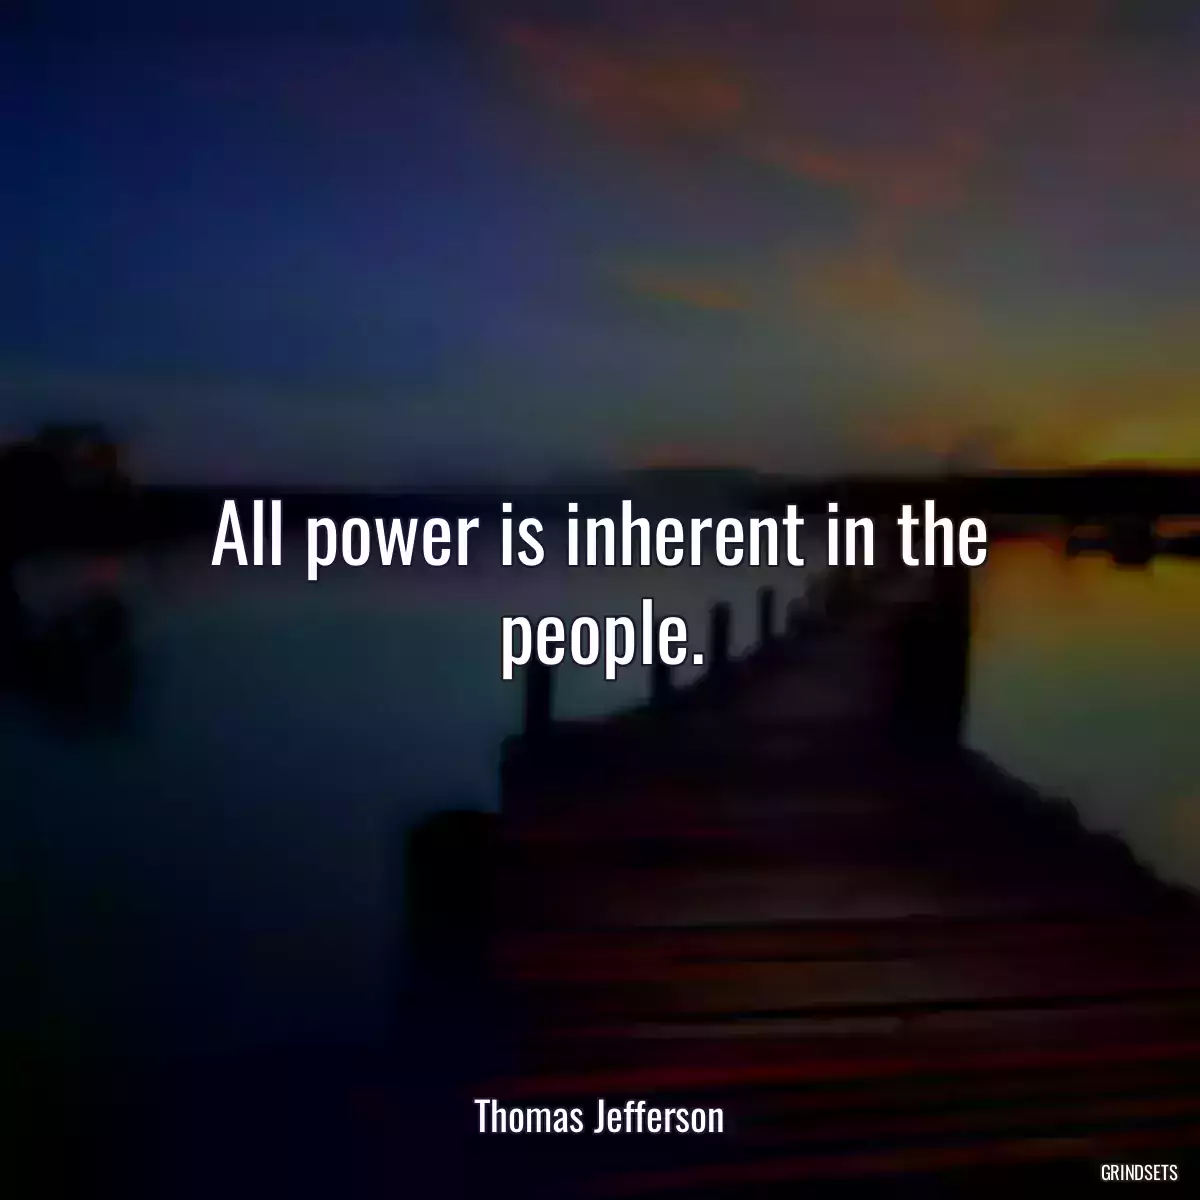 All power is inherent in the people.